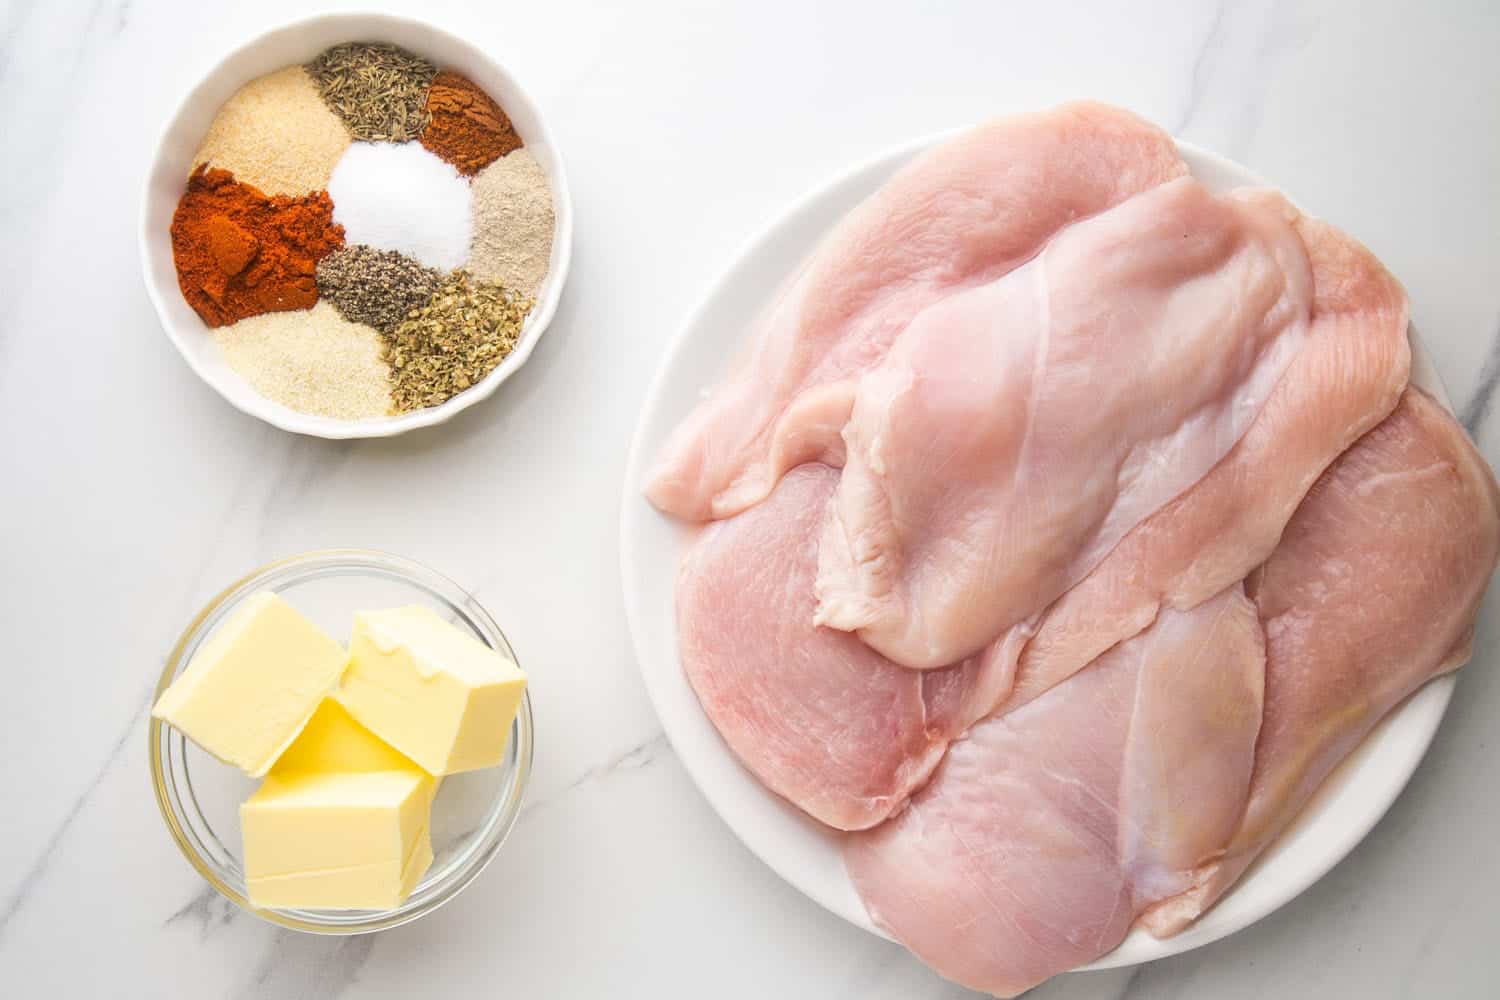 Ingredients needed for making blackened chicken including chicken cutlets, spices, and butter.